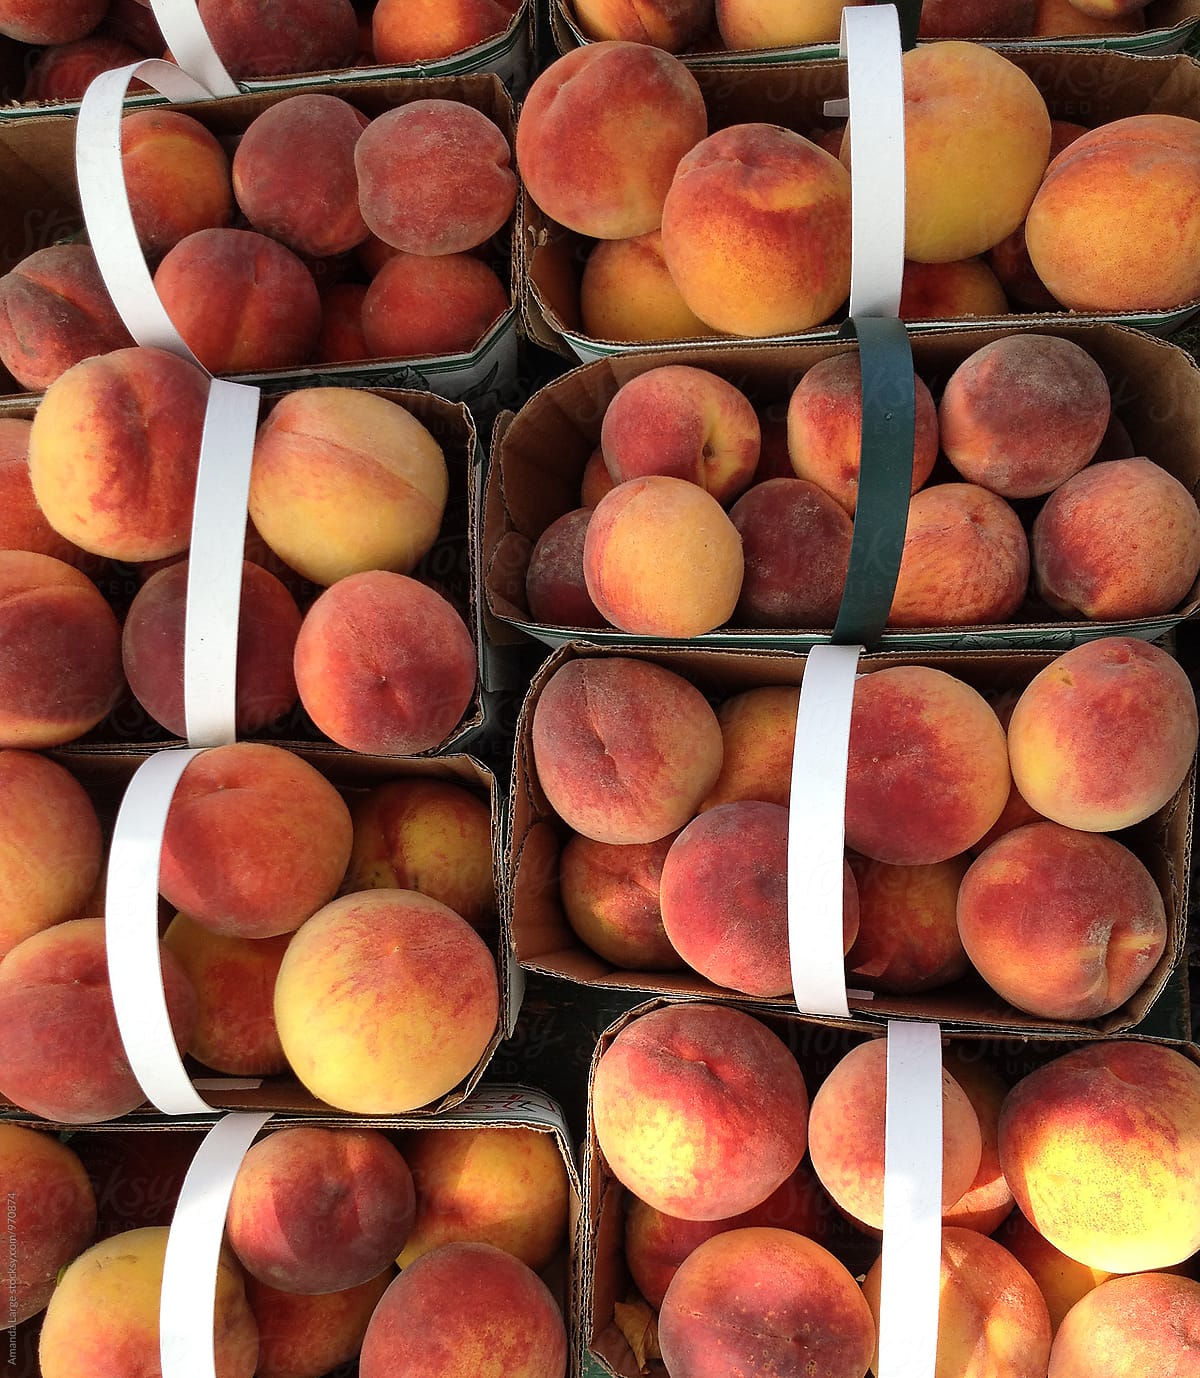 Punnets of peaches at a market stall